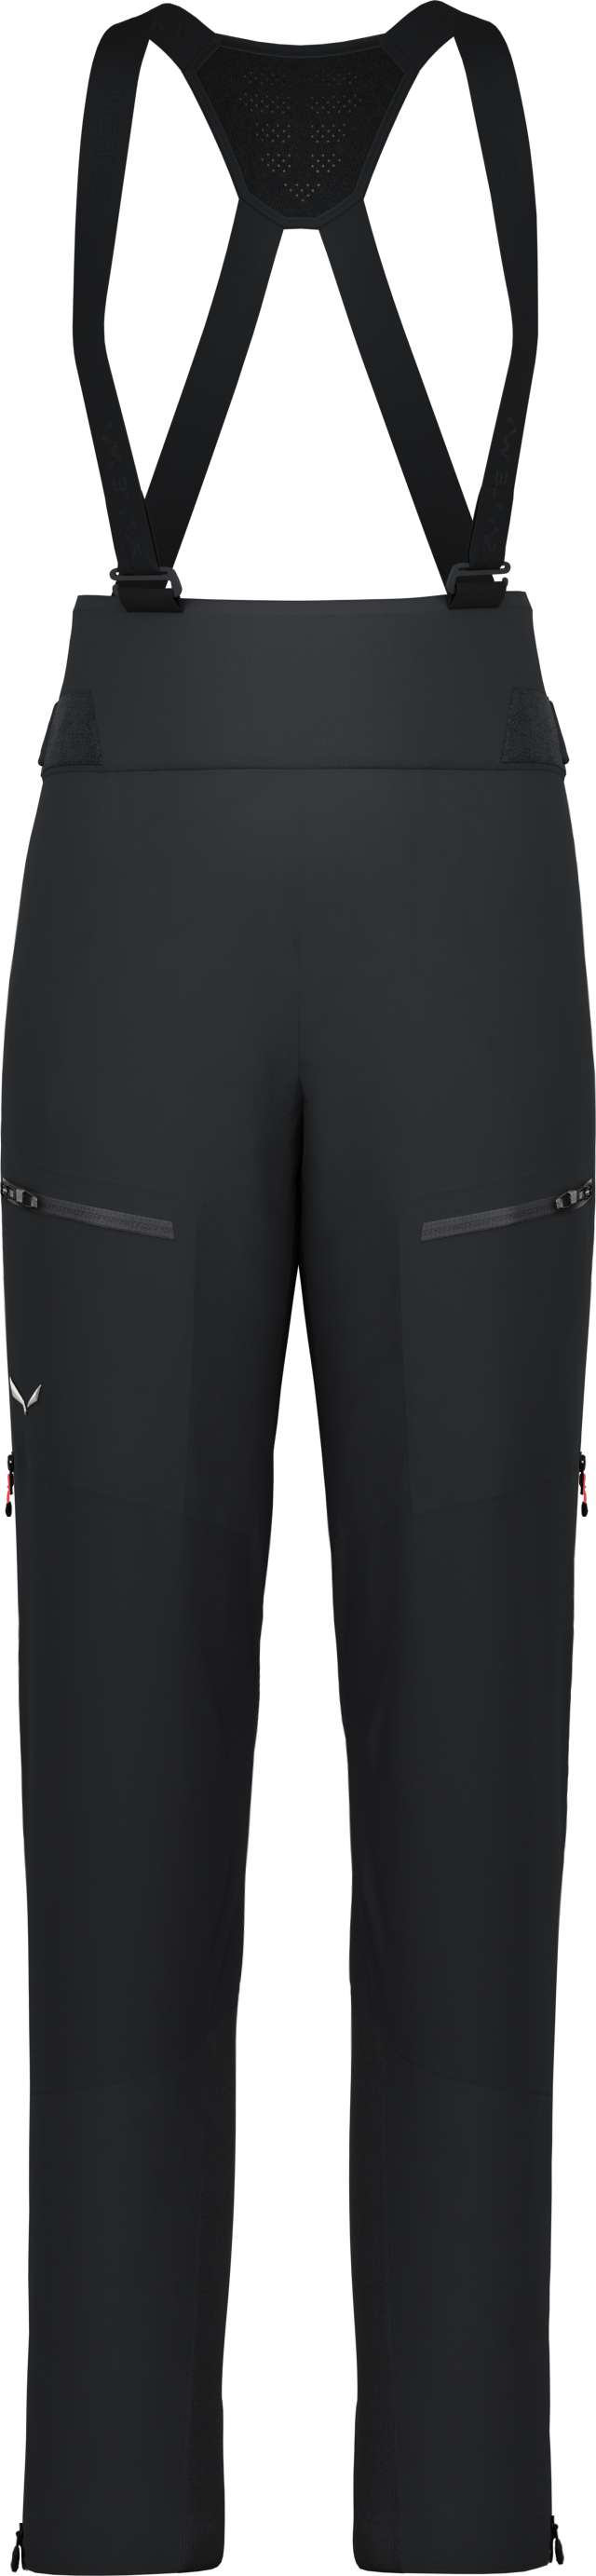 Salewa Women’s Ortles GORE-TEX Pro Stretch Pant Black Out